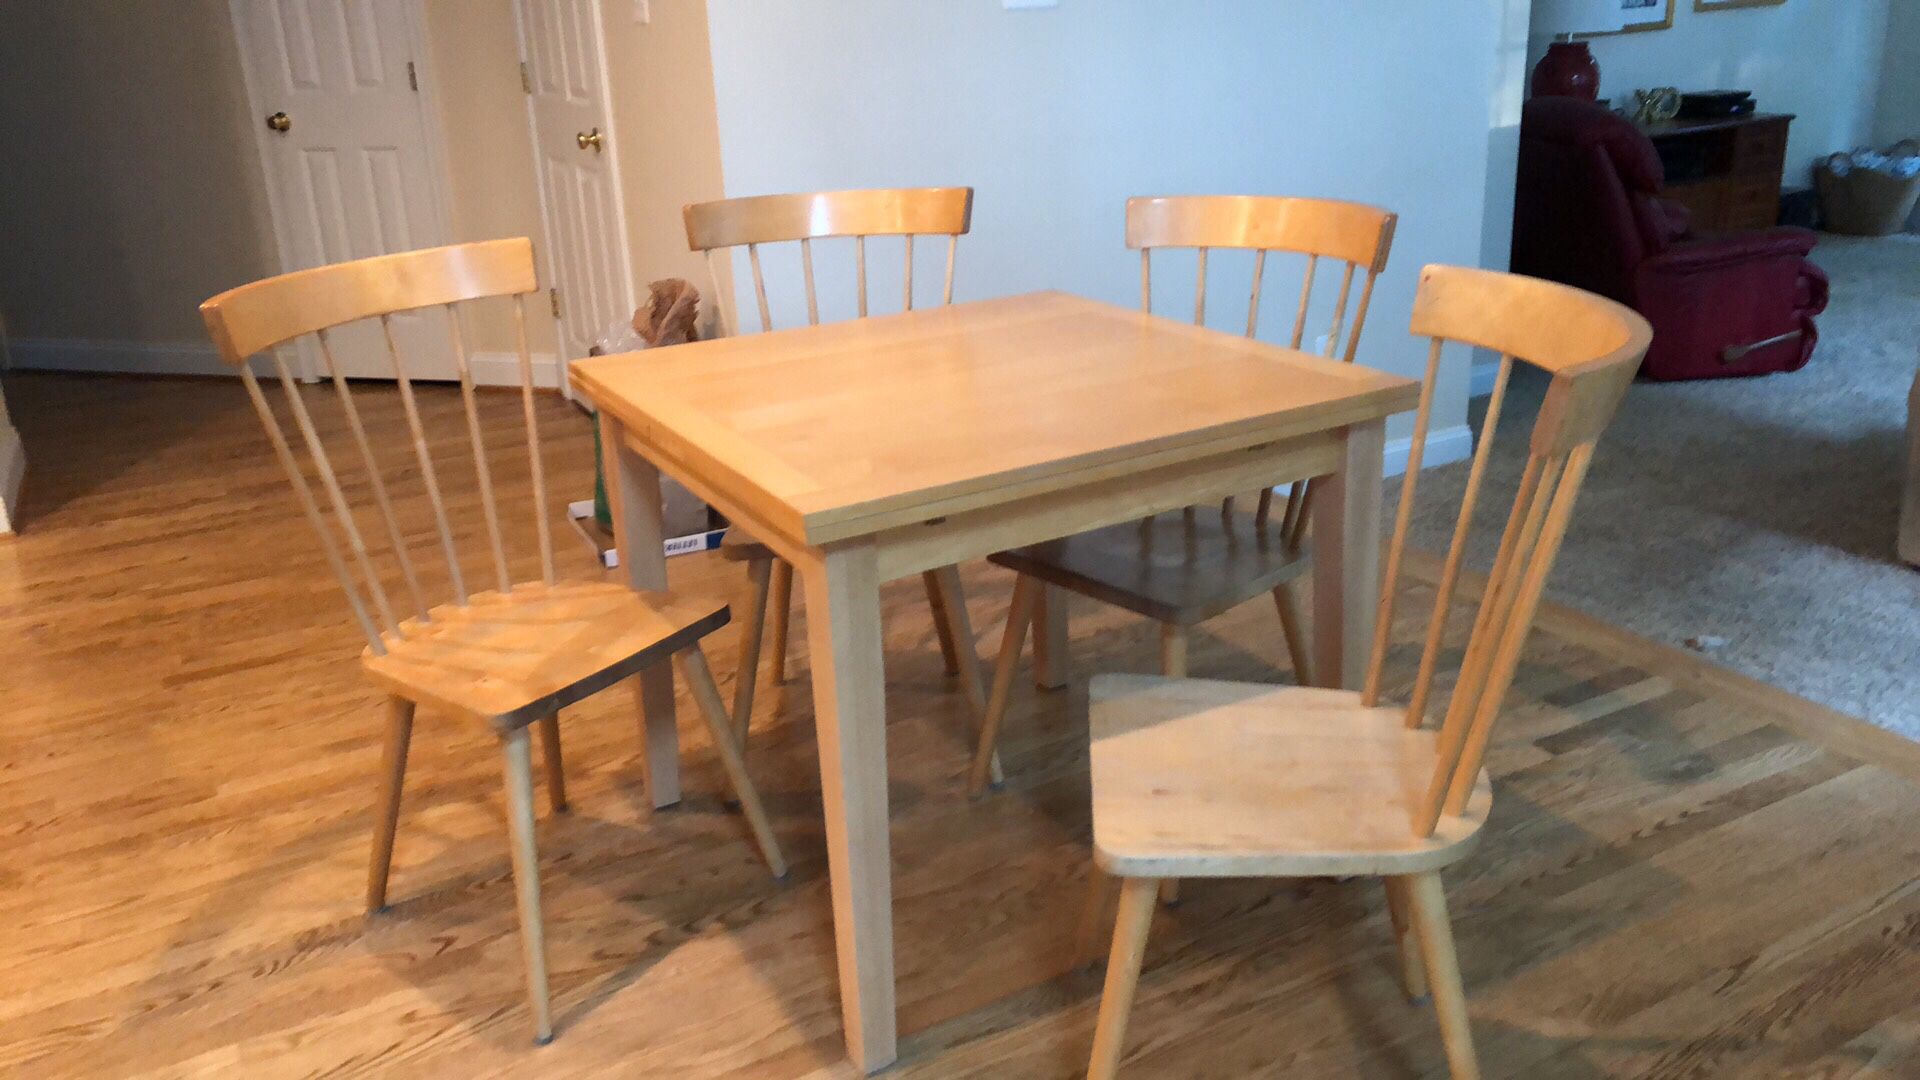 Wooden table with 4 chairs - expands to double the length